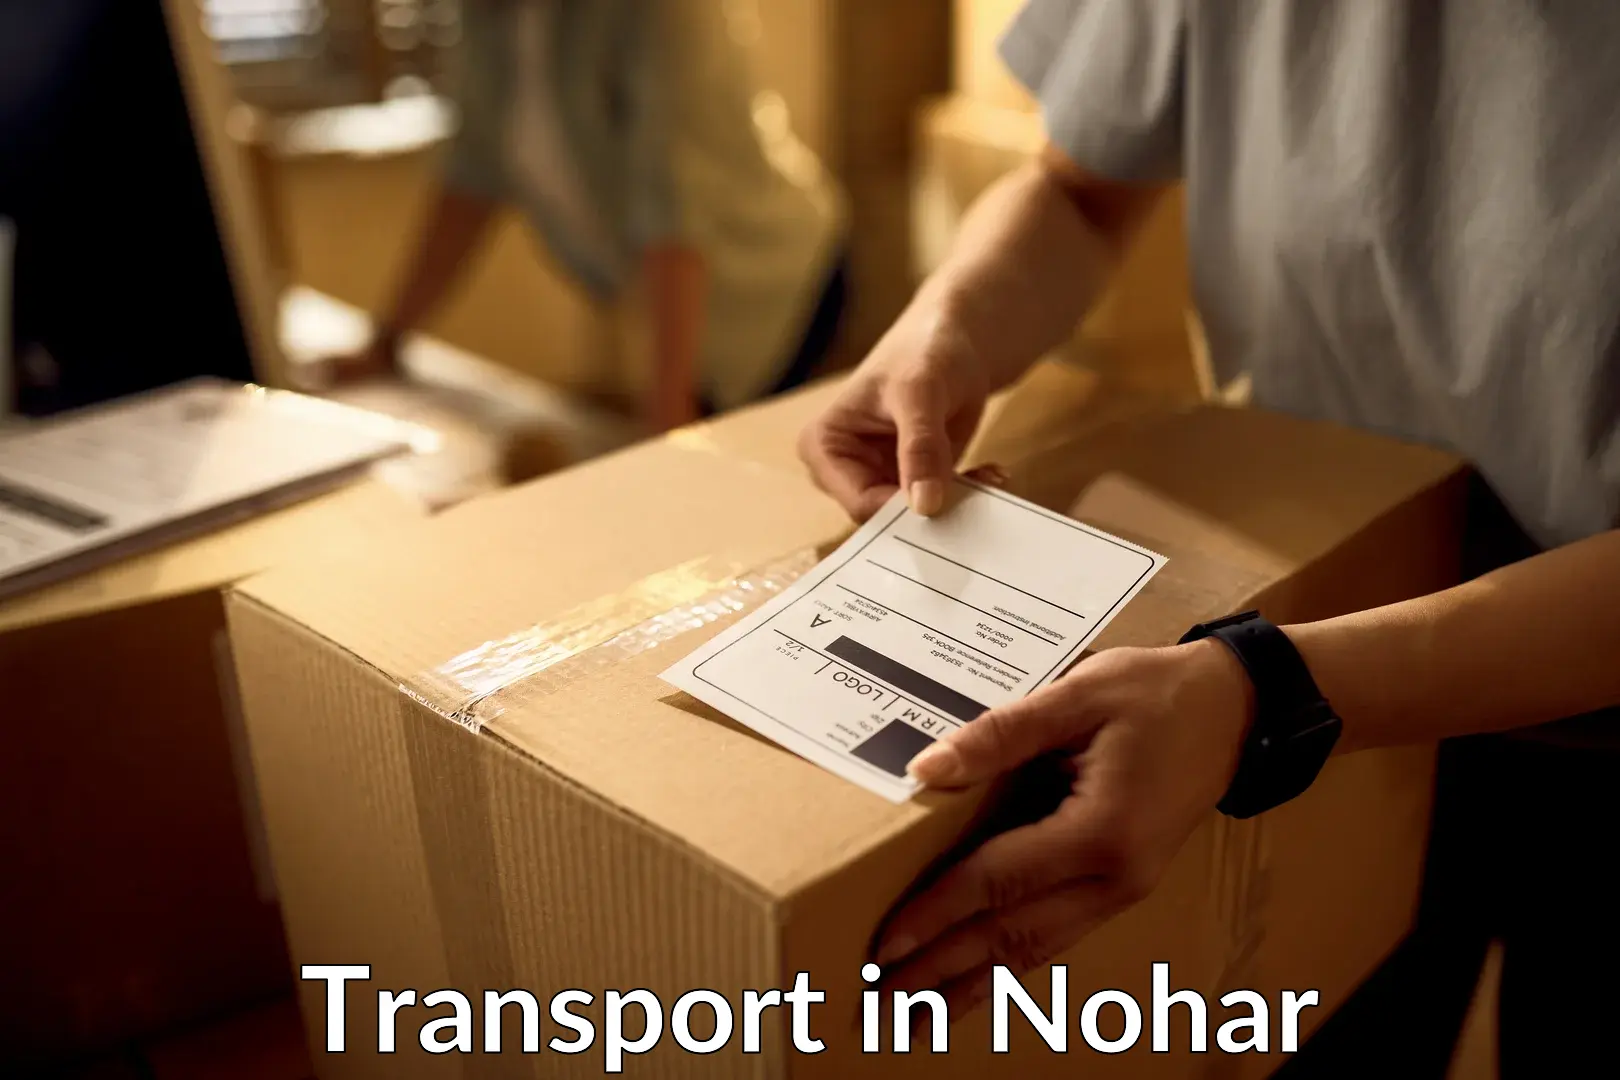 Daily parcel service transport in Nohar